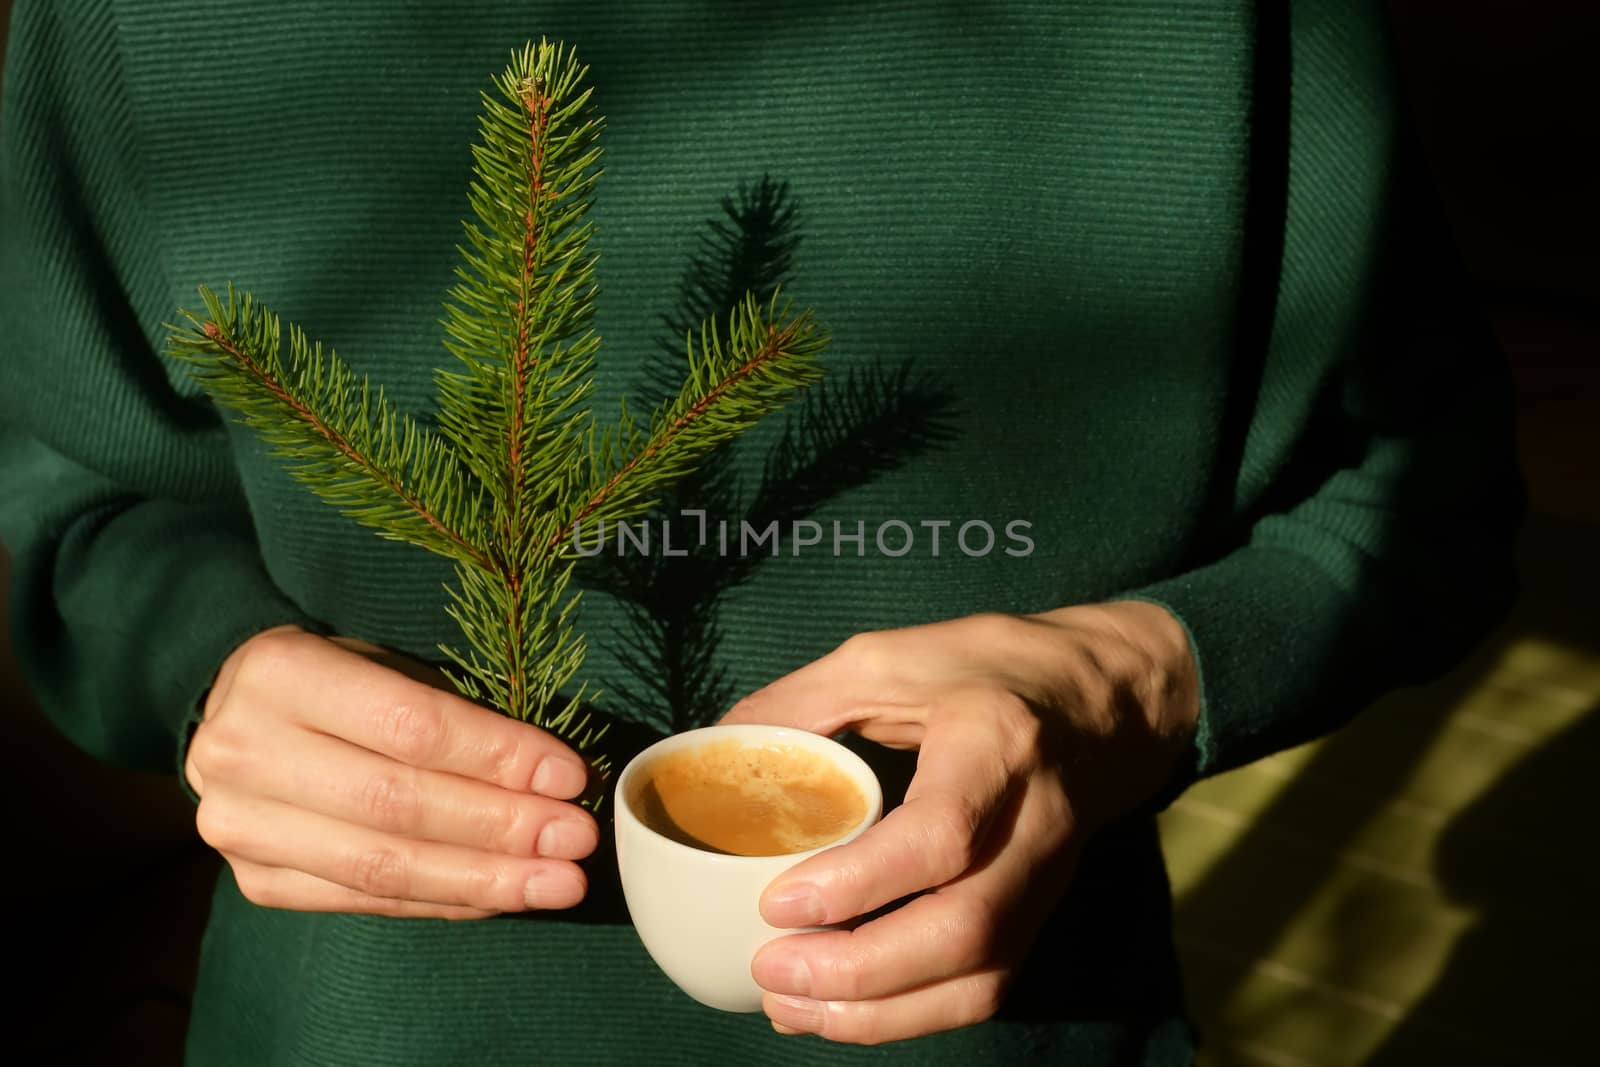 Woman is holding pine tree branch and an espresso cup